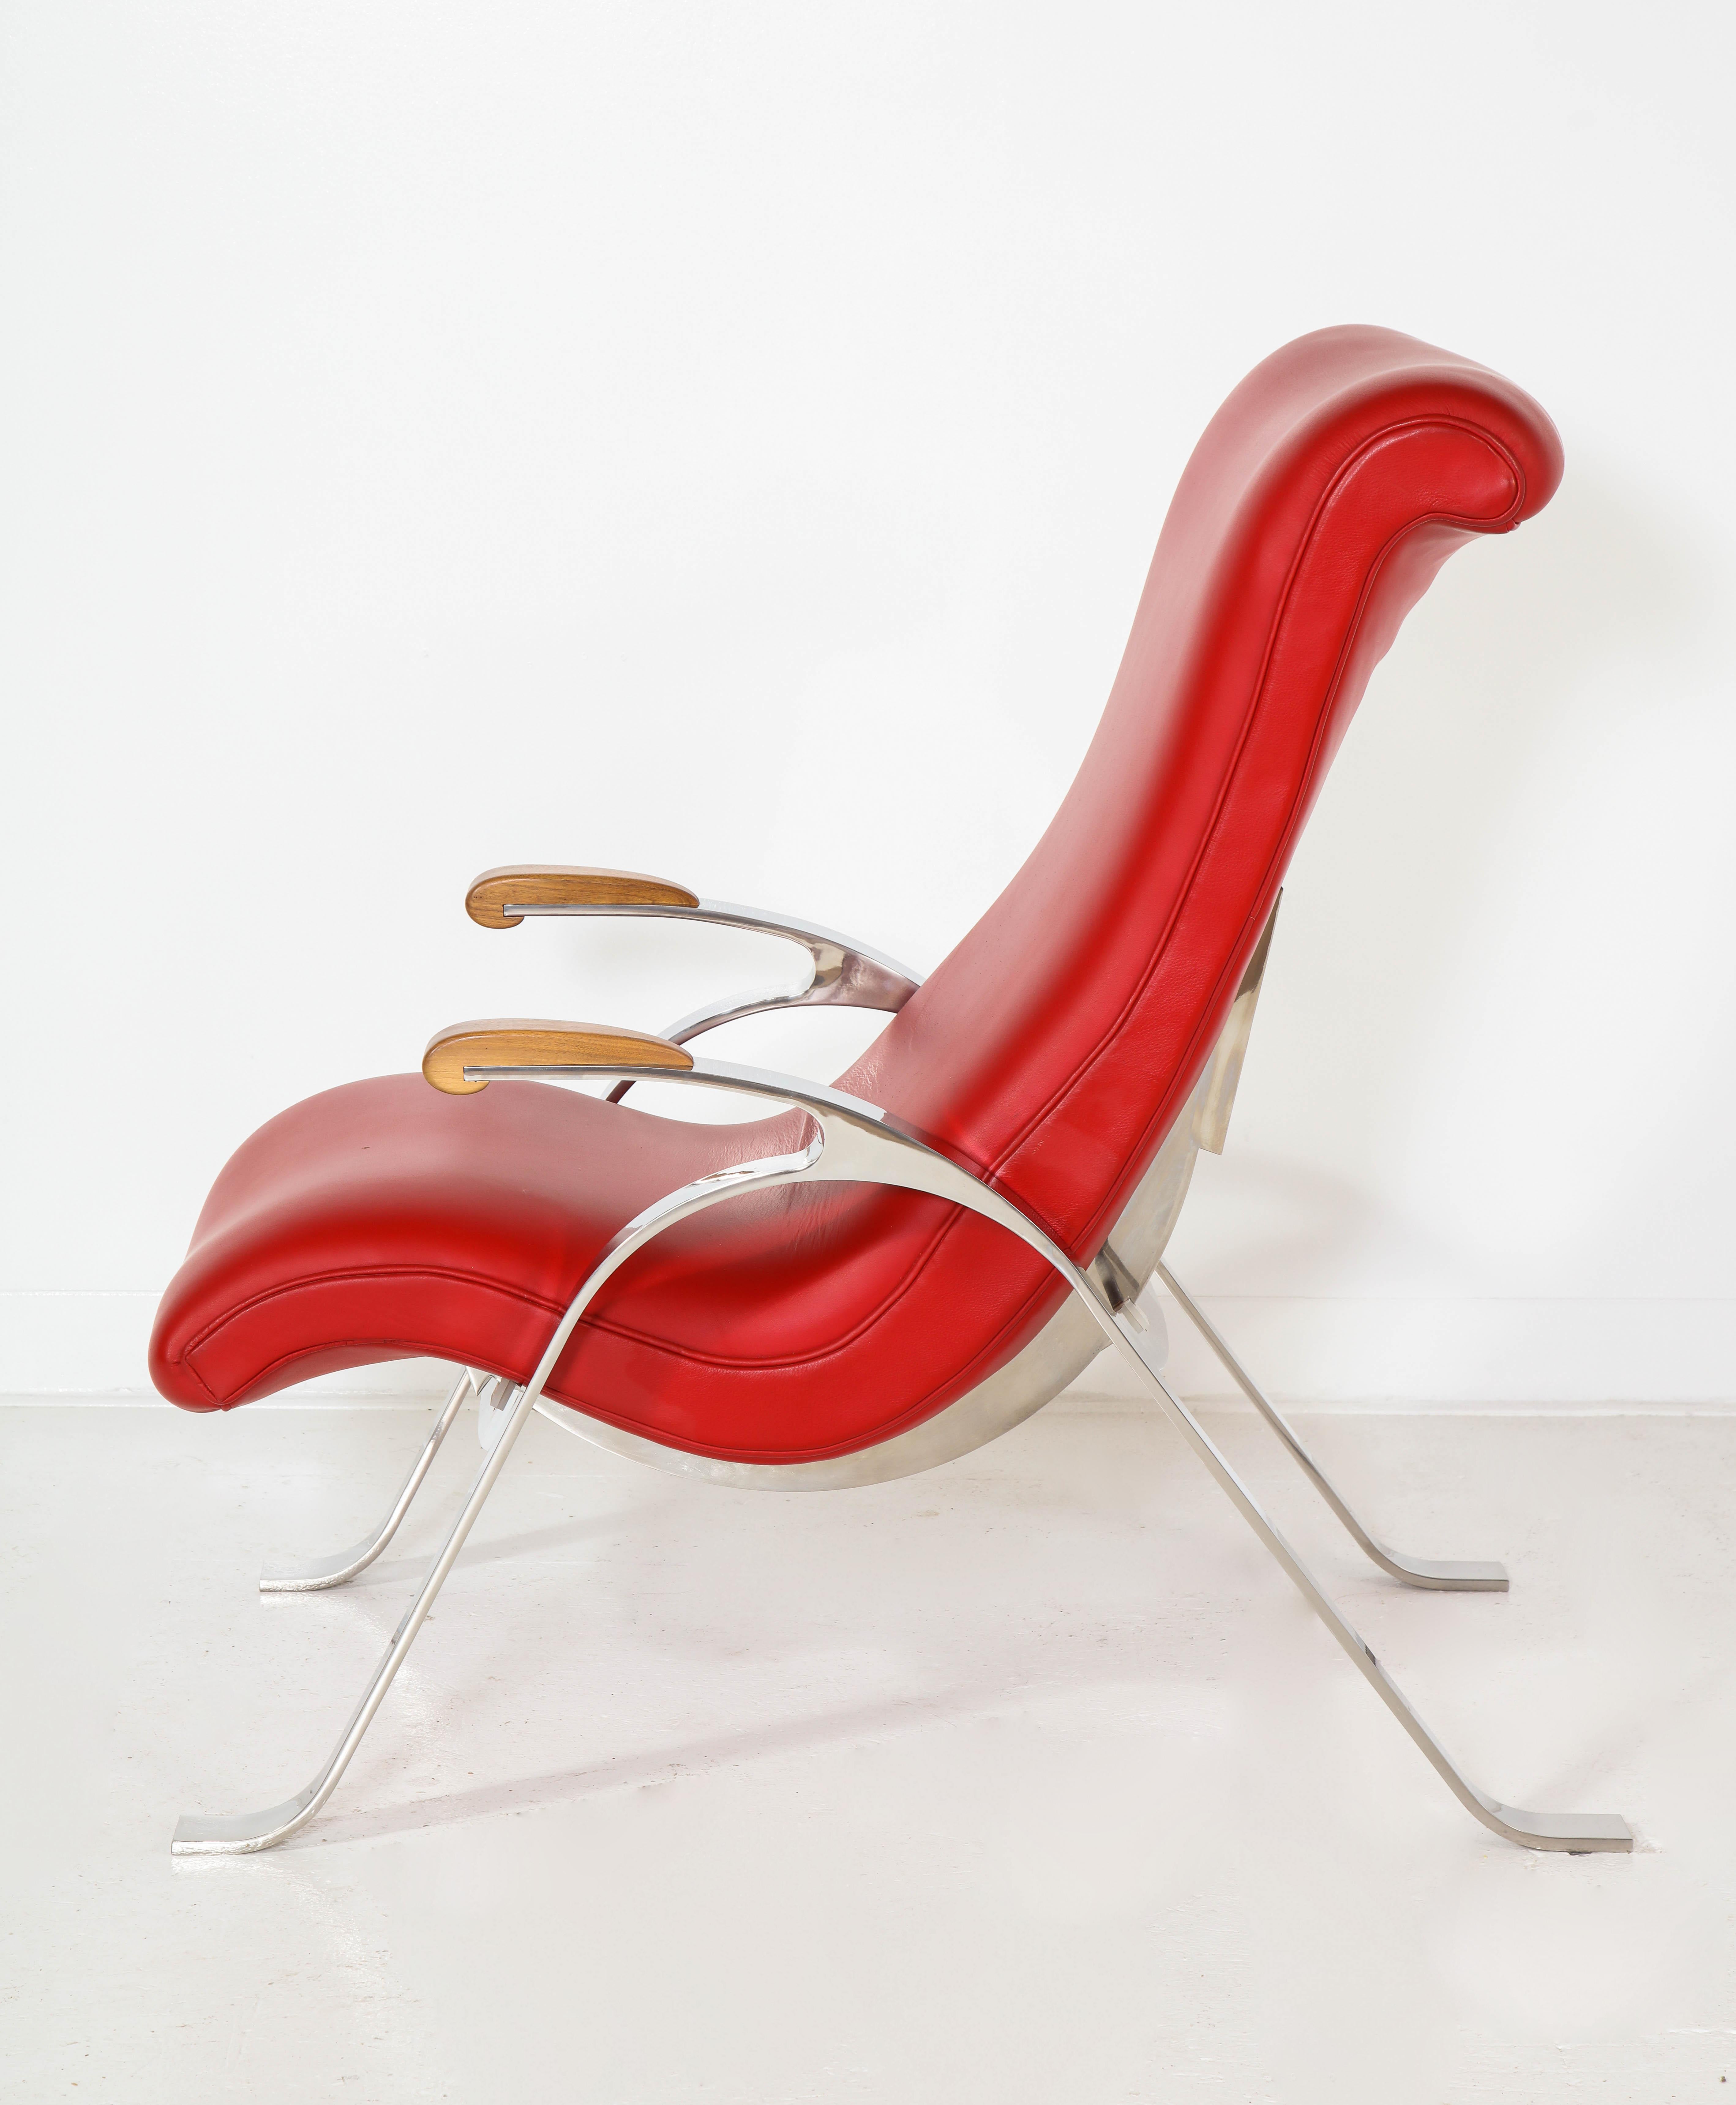 Modern Multi-Position Reclining Chair in Red Offered by Vladimir Kagan Design Group For Sale